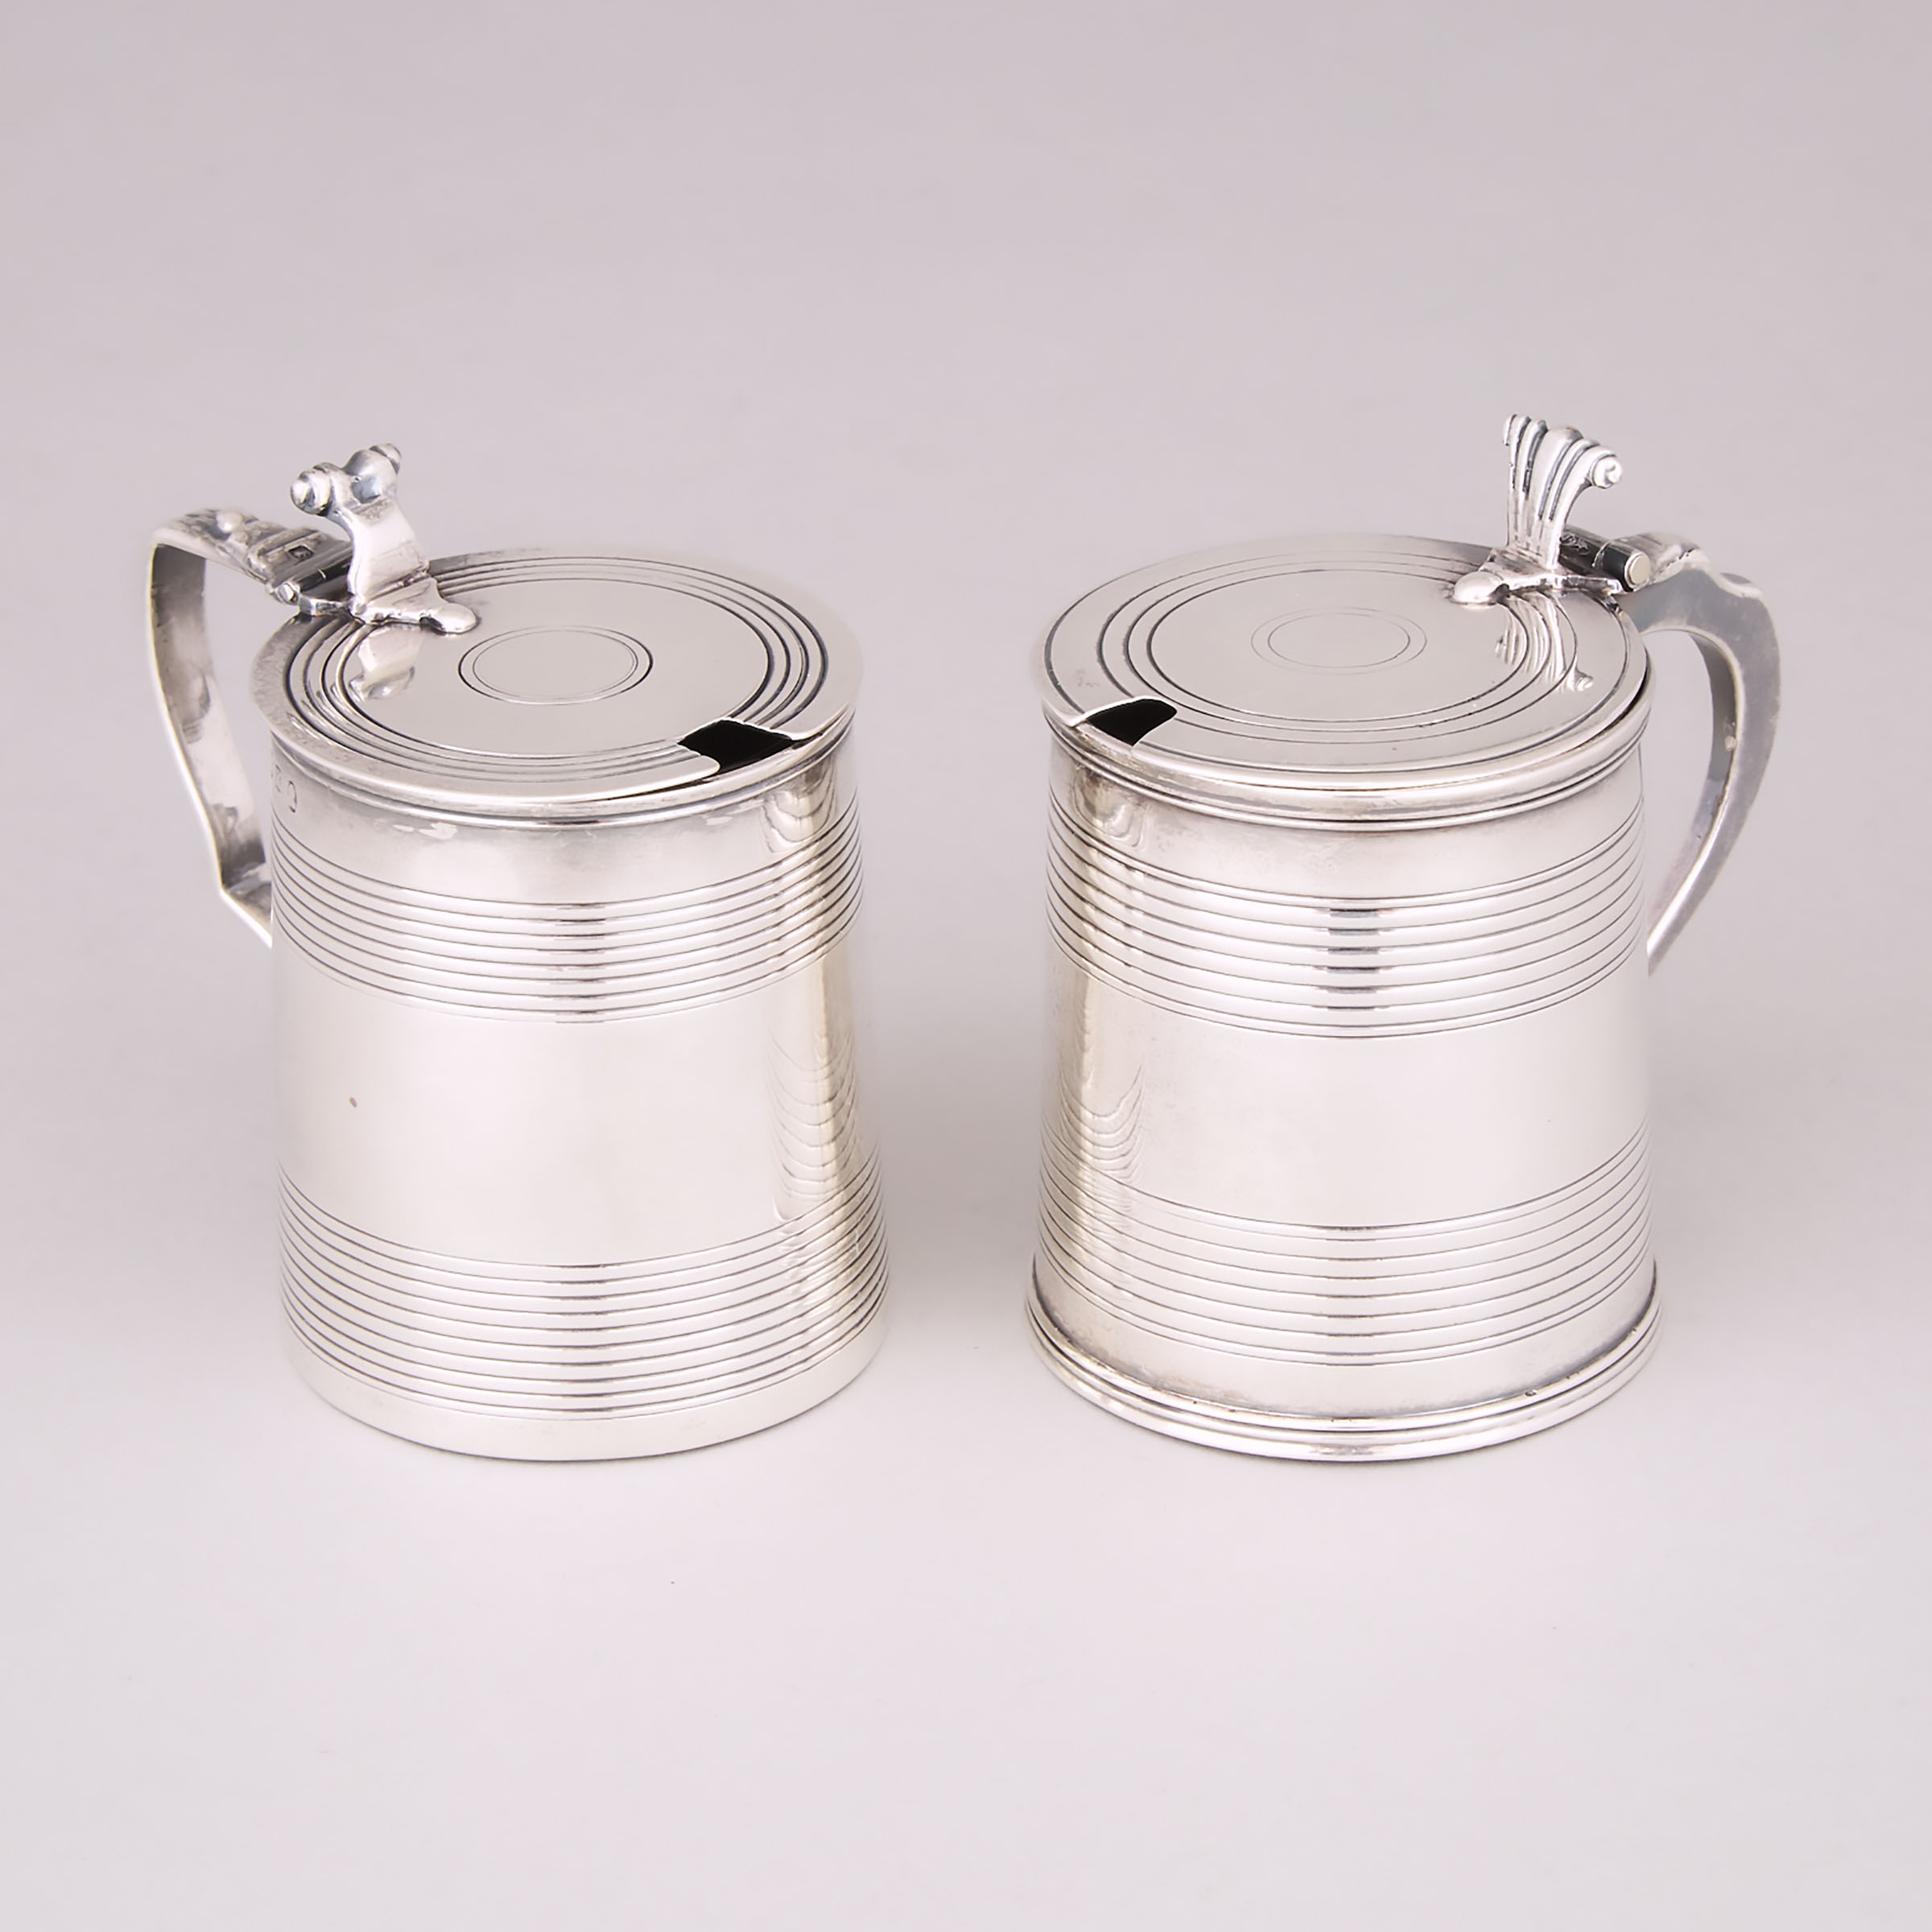 Two Georgian Silver Drum Mustard Pots, Stephen Adams and another maker, London, 1805 and c.1835